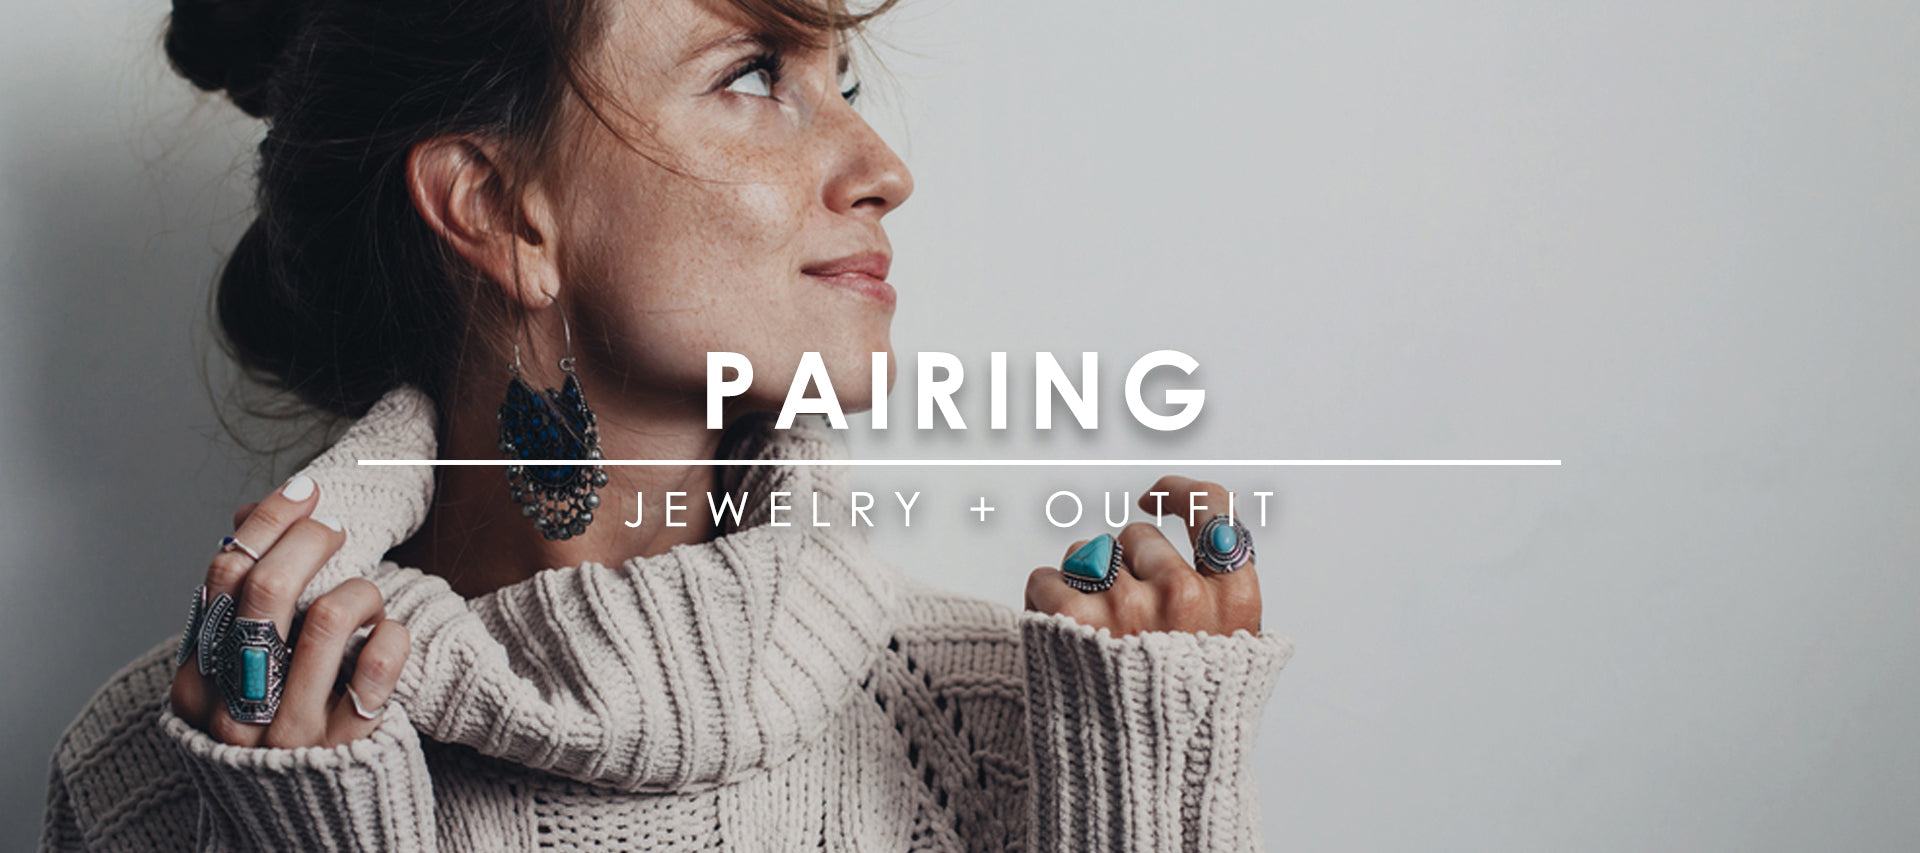 How to Decide on What Jewelry to Pair with Your Outfit